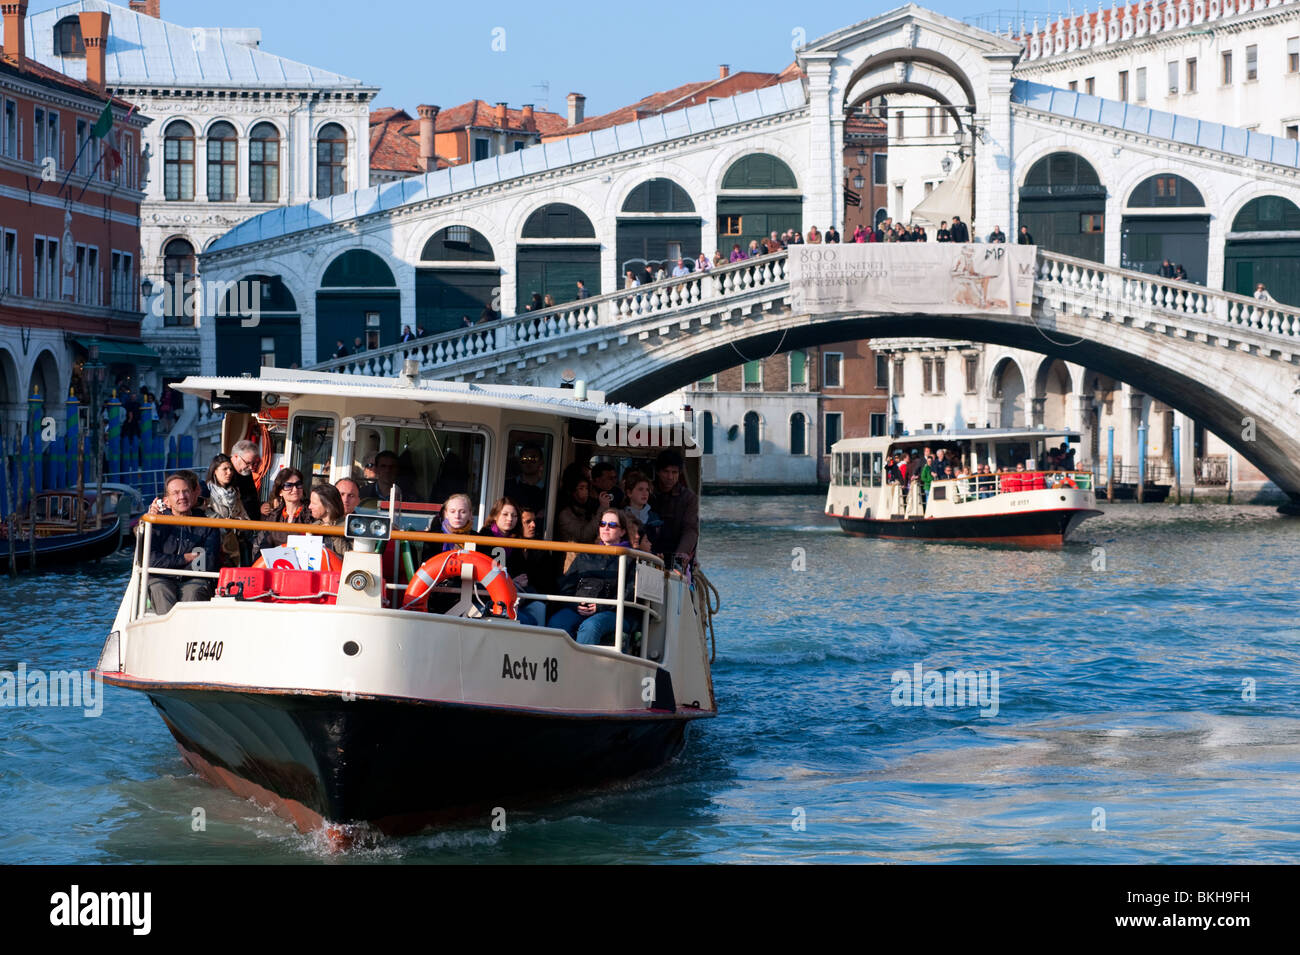 Waterbuses or Vaporetti travelling on the Grand Canal beneath the famous Rialto Bridge in Venice Italy Stock Photo